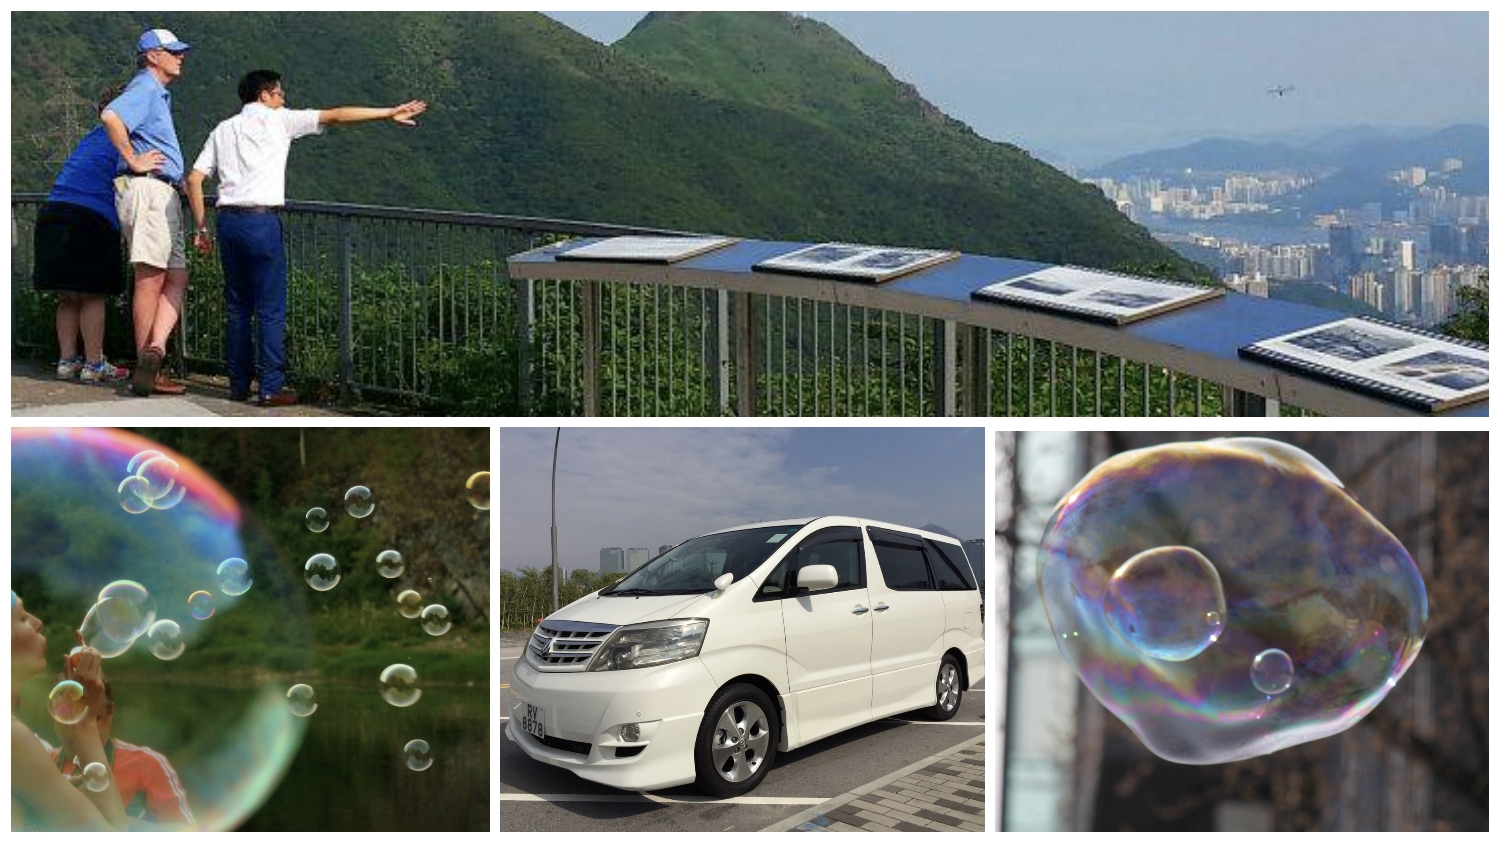 Hong Kong private car tour is a safe mini bubble inside the Air Travel Bubble for Singapore couples